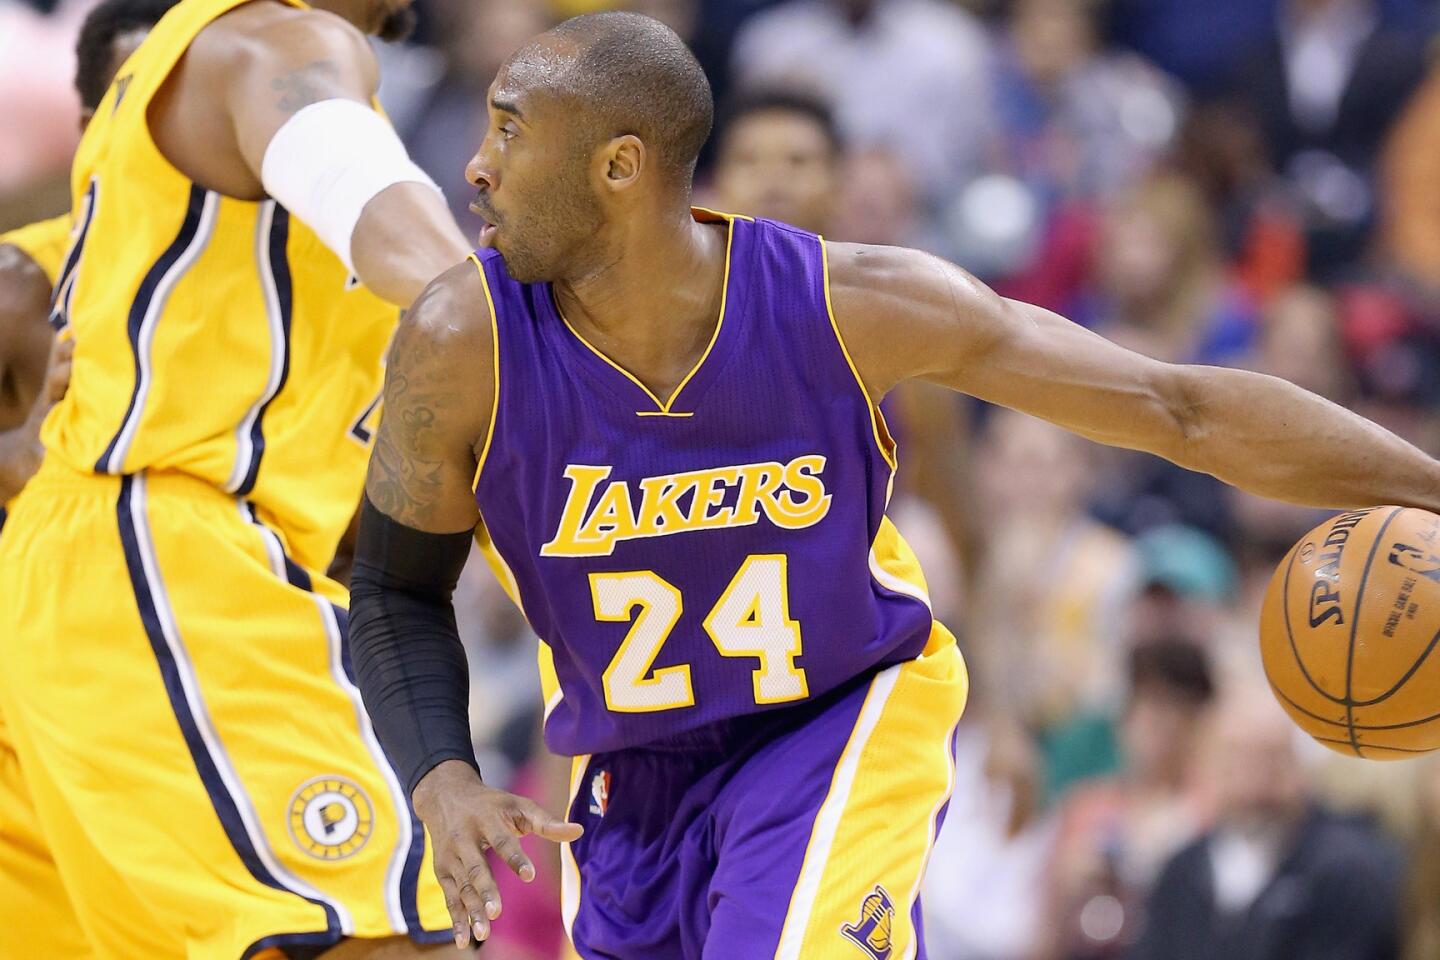 Lakers' Kobe Bryant maintained Hornets didn't want him after 1996